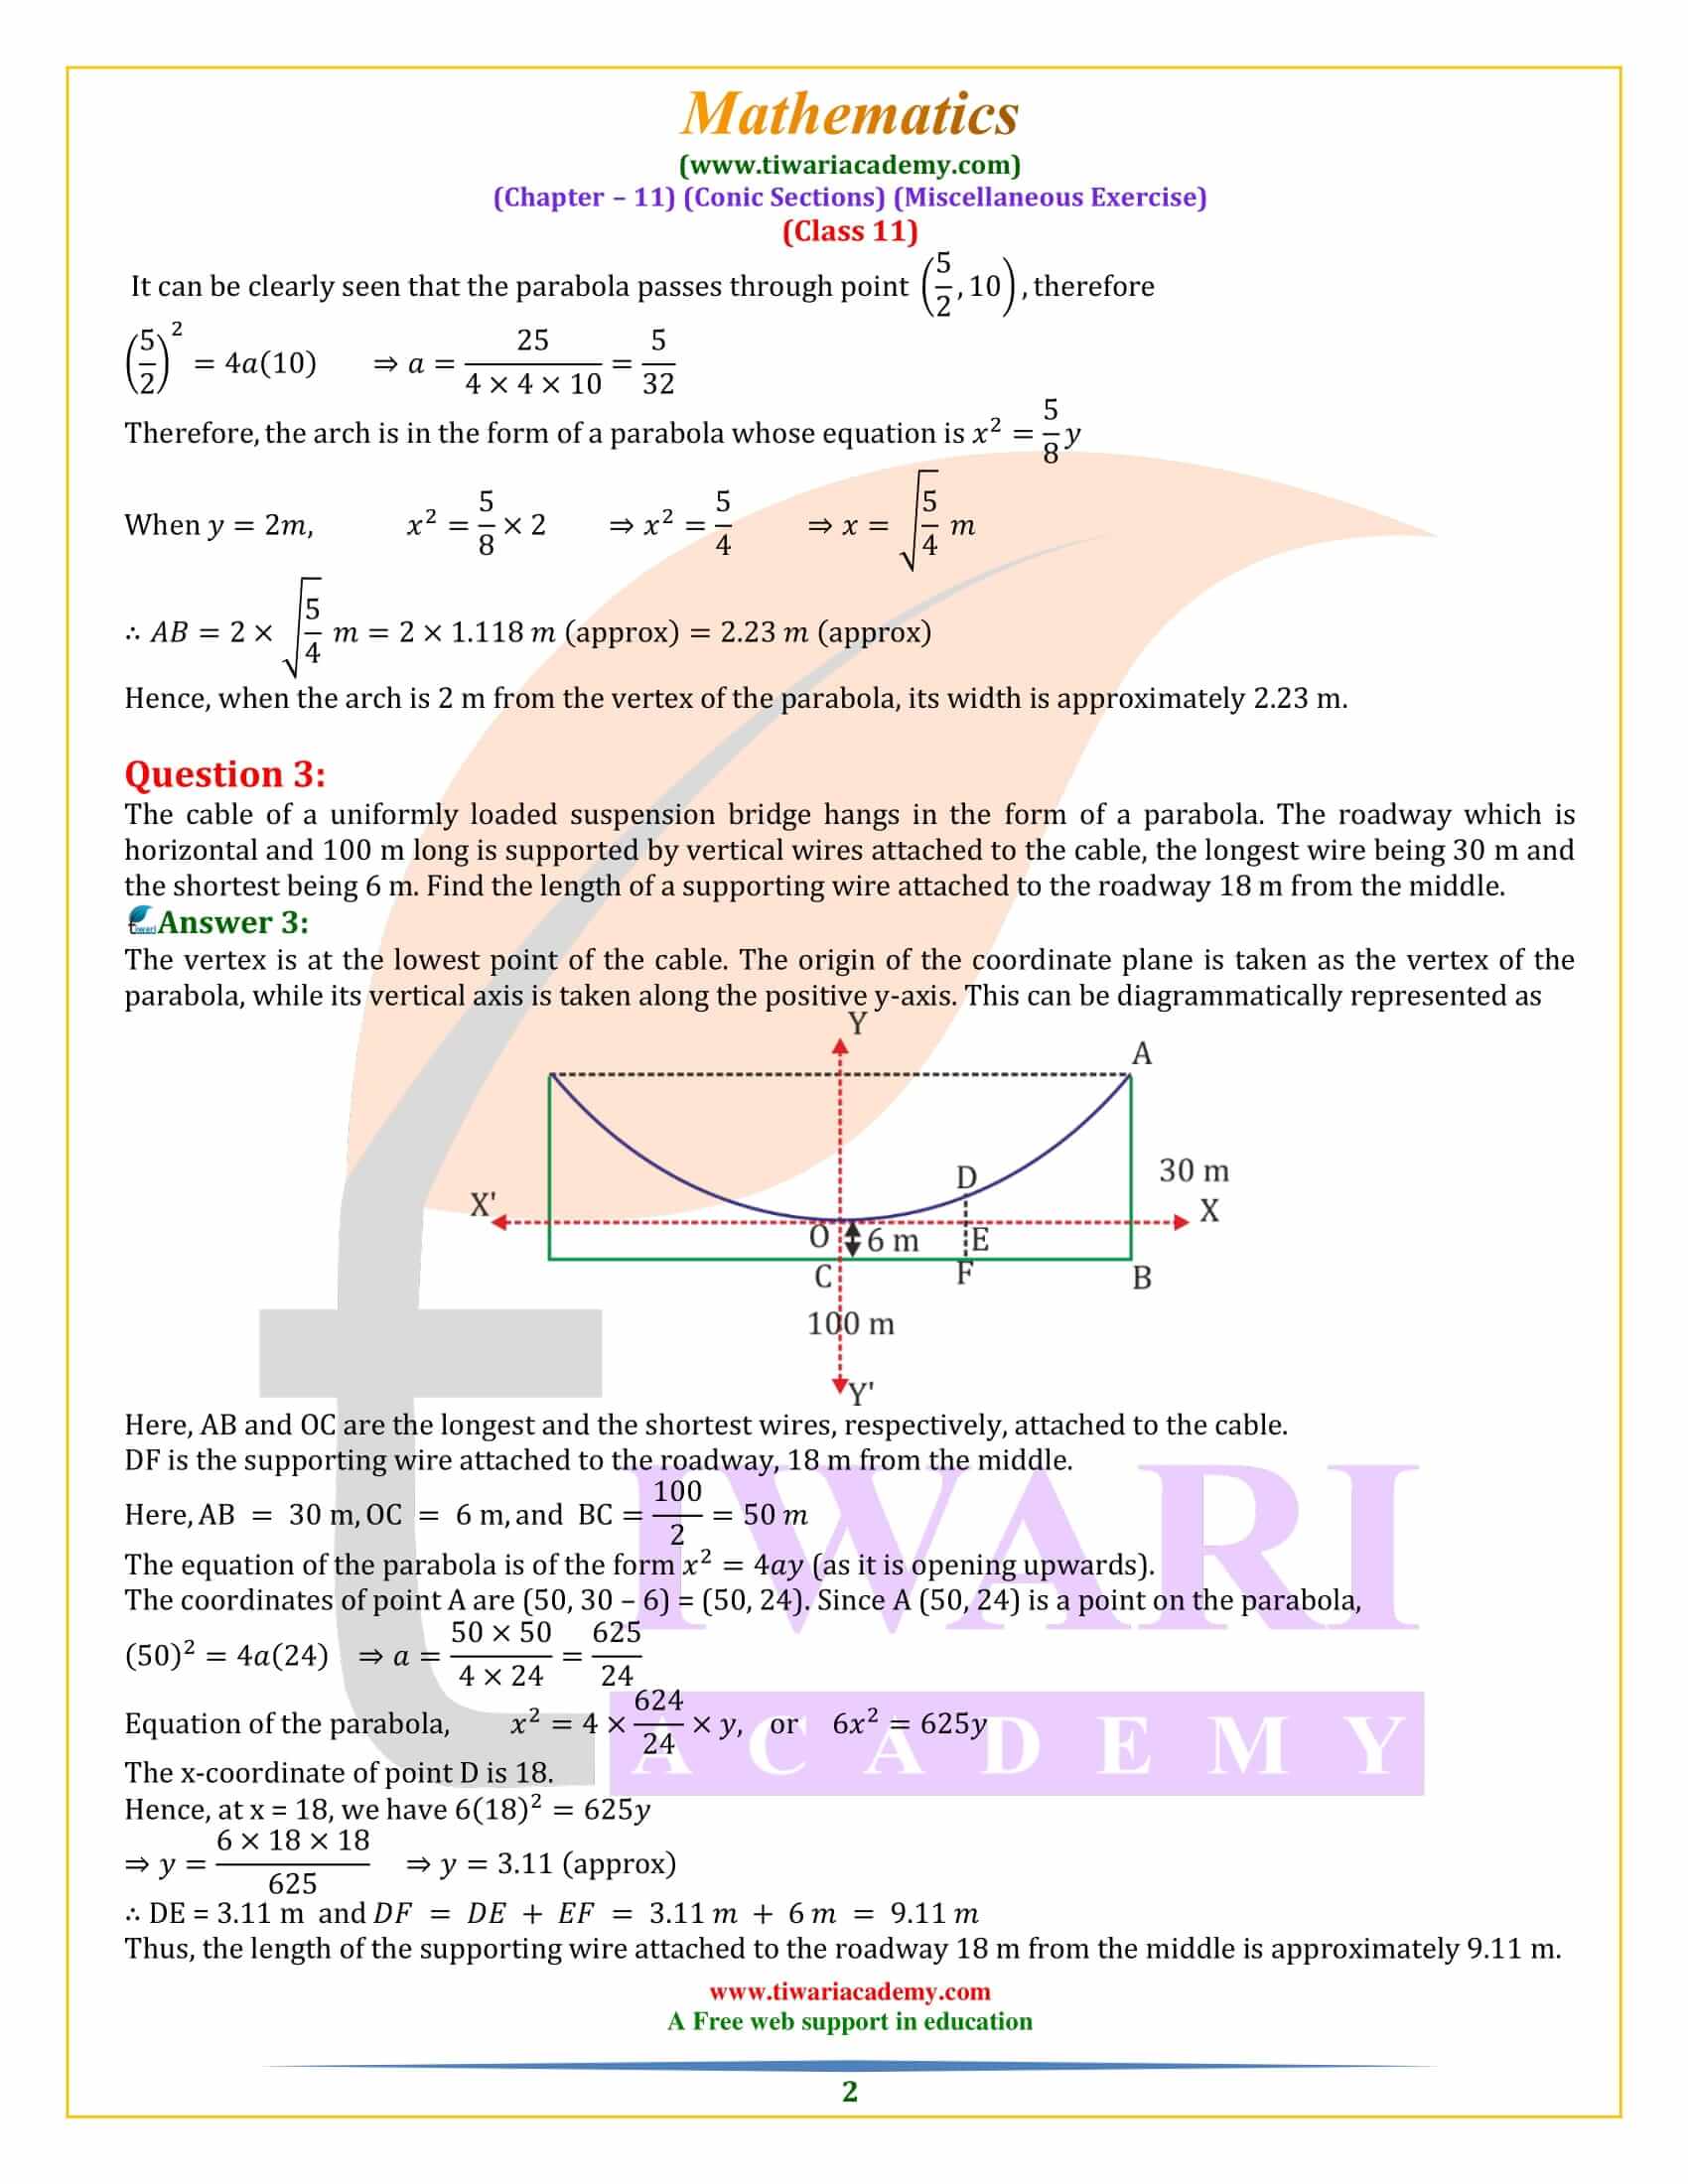 NCERT Solutions for Class 11 Maths Chapter 11 Miscellaneous Exercise 11